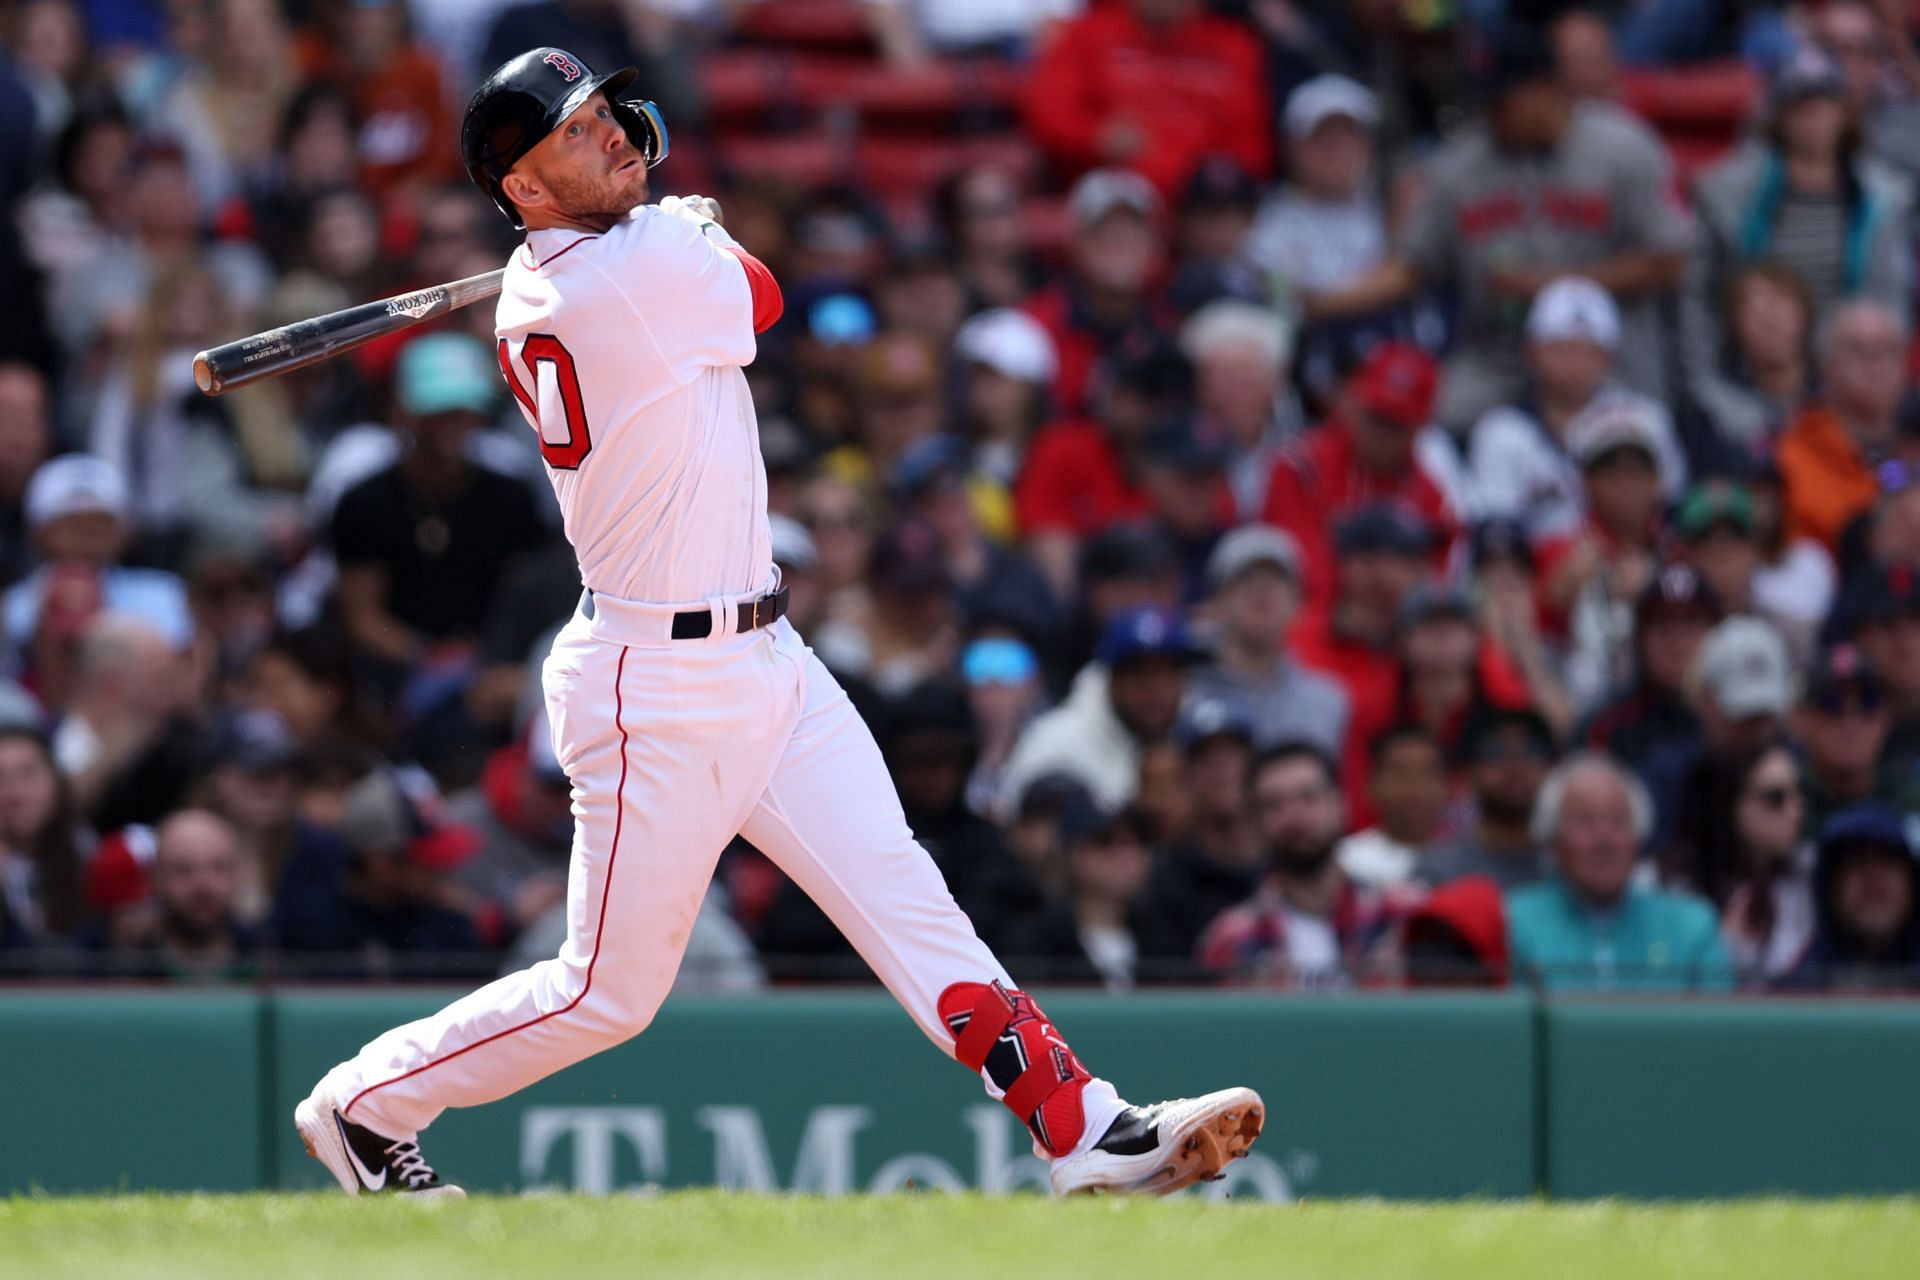 Trevor Story has been underwhelming for the Boston Red Sox thus far, but expect him to pick it up